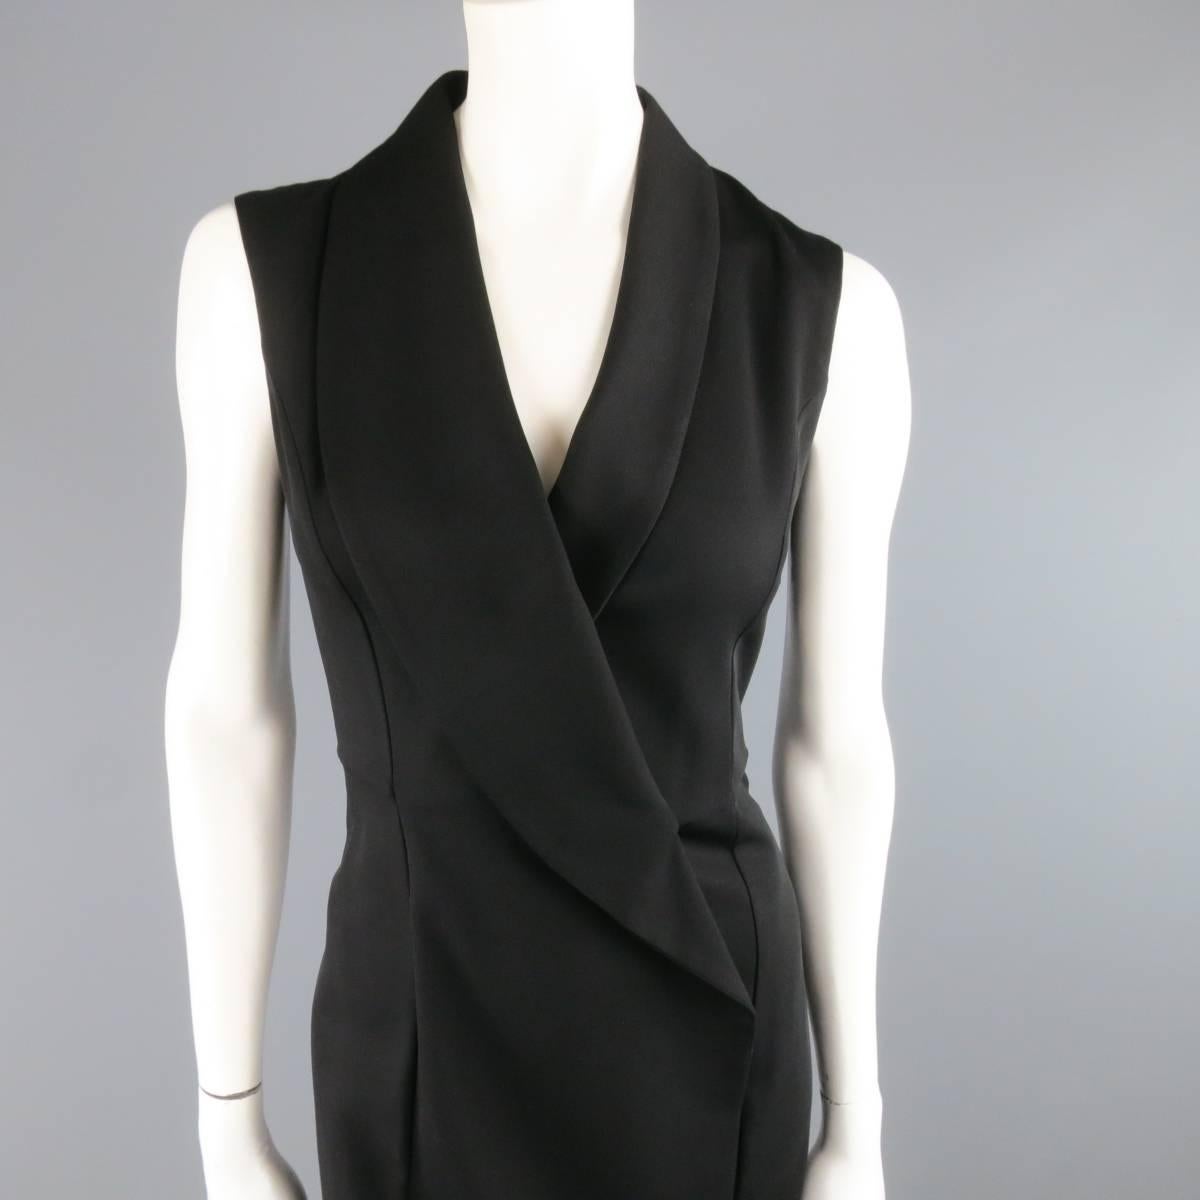 MAISON MARTIN MARGIELA wool blend black dress features an oversize shawl collar lapel in a faux wrap stye. Fully lined with a side zipper closure. Brand new with tags.
 
New with Tags. Retails at $1195.00.
Marked: 40
 
Measurements:
 
Shoulders: